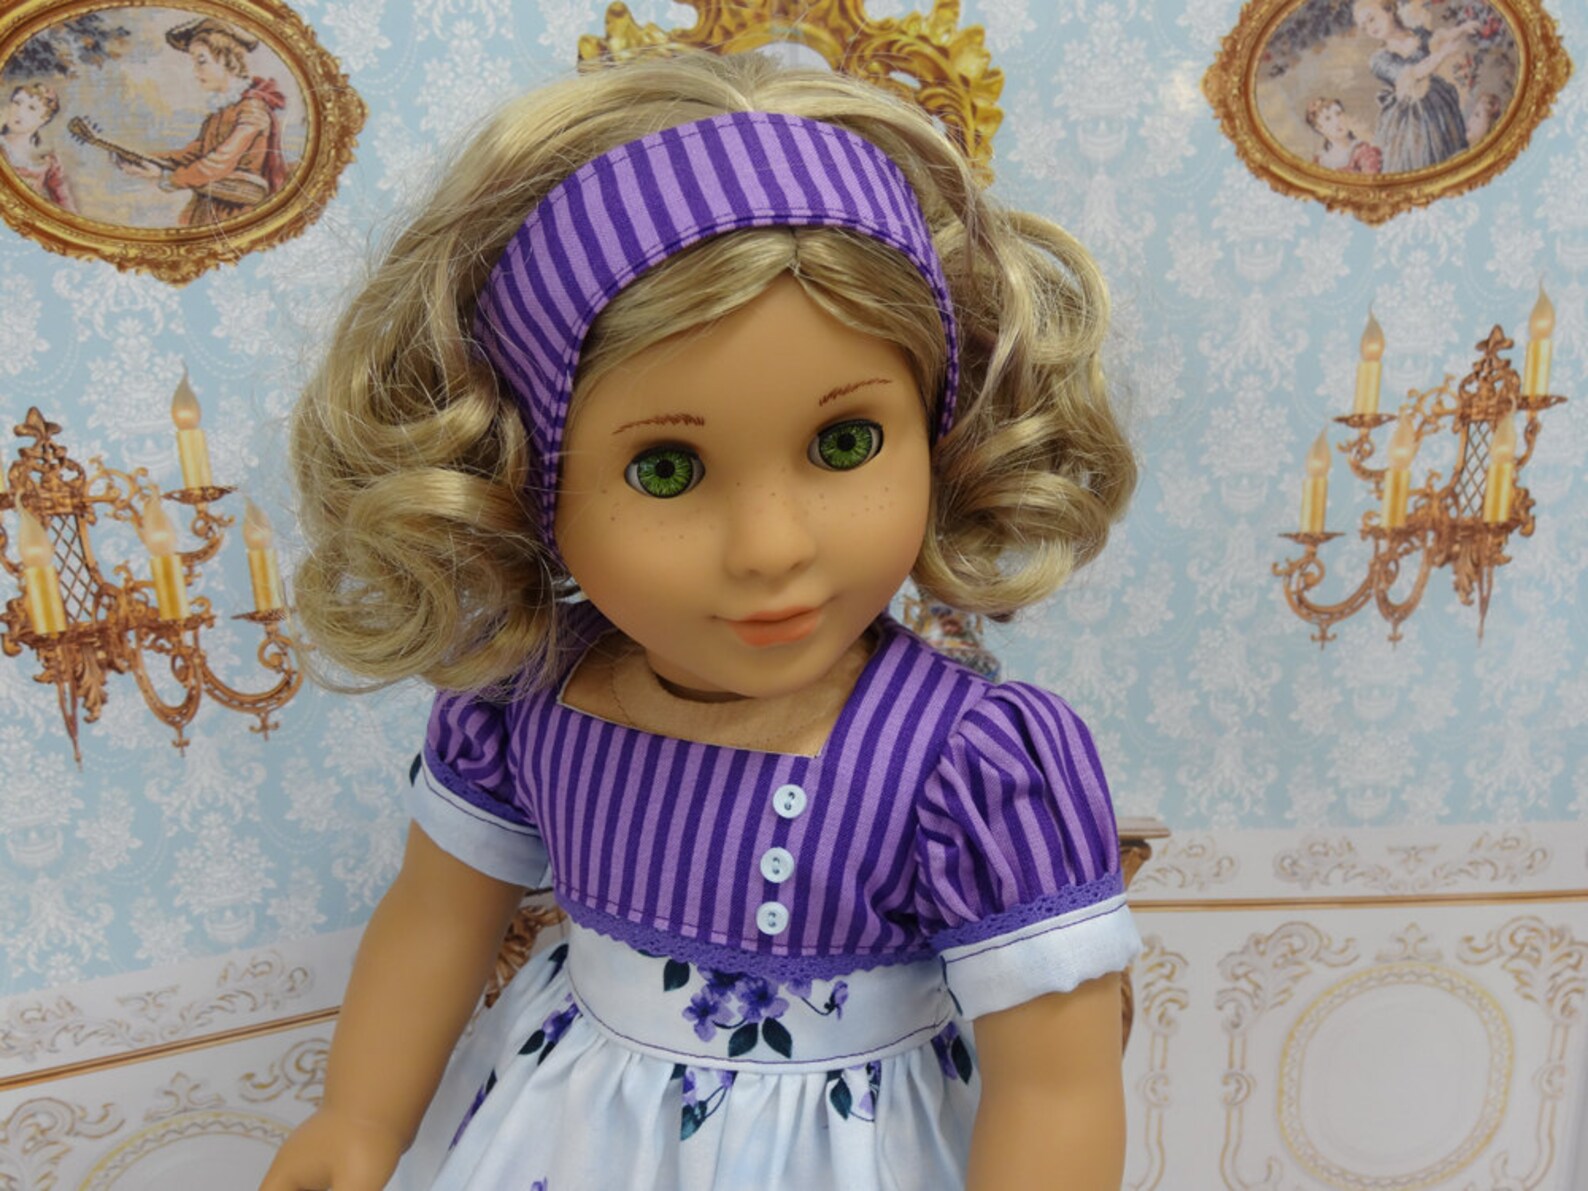 Lovely Lilacs Vintage Style Dress for American Girl Doll - Etsy